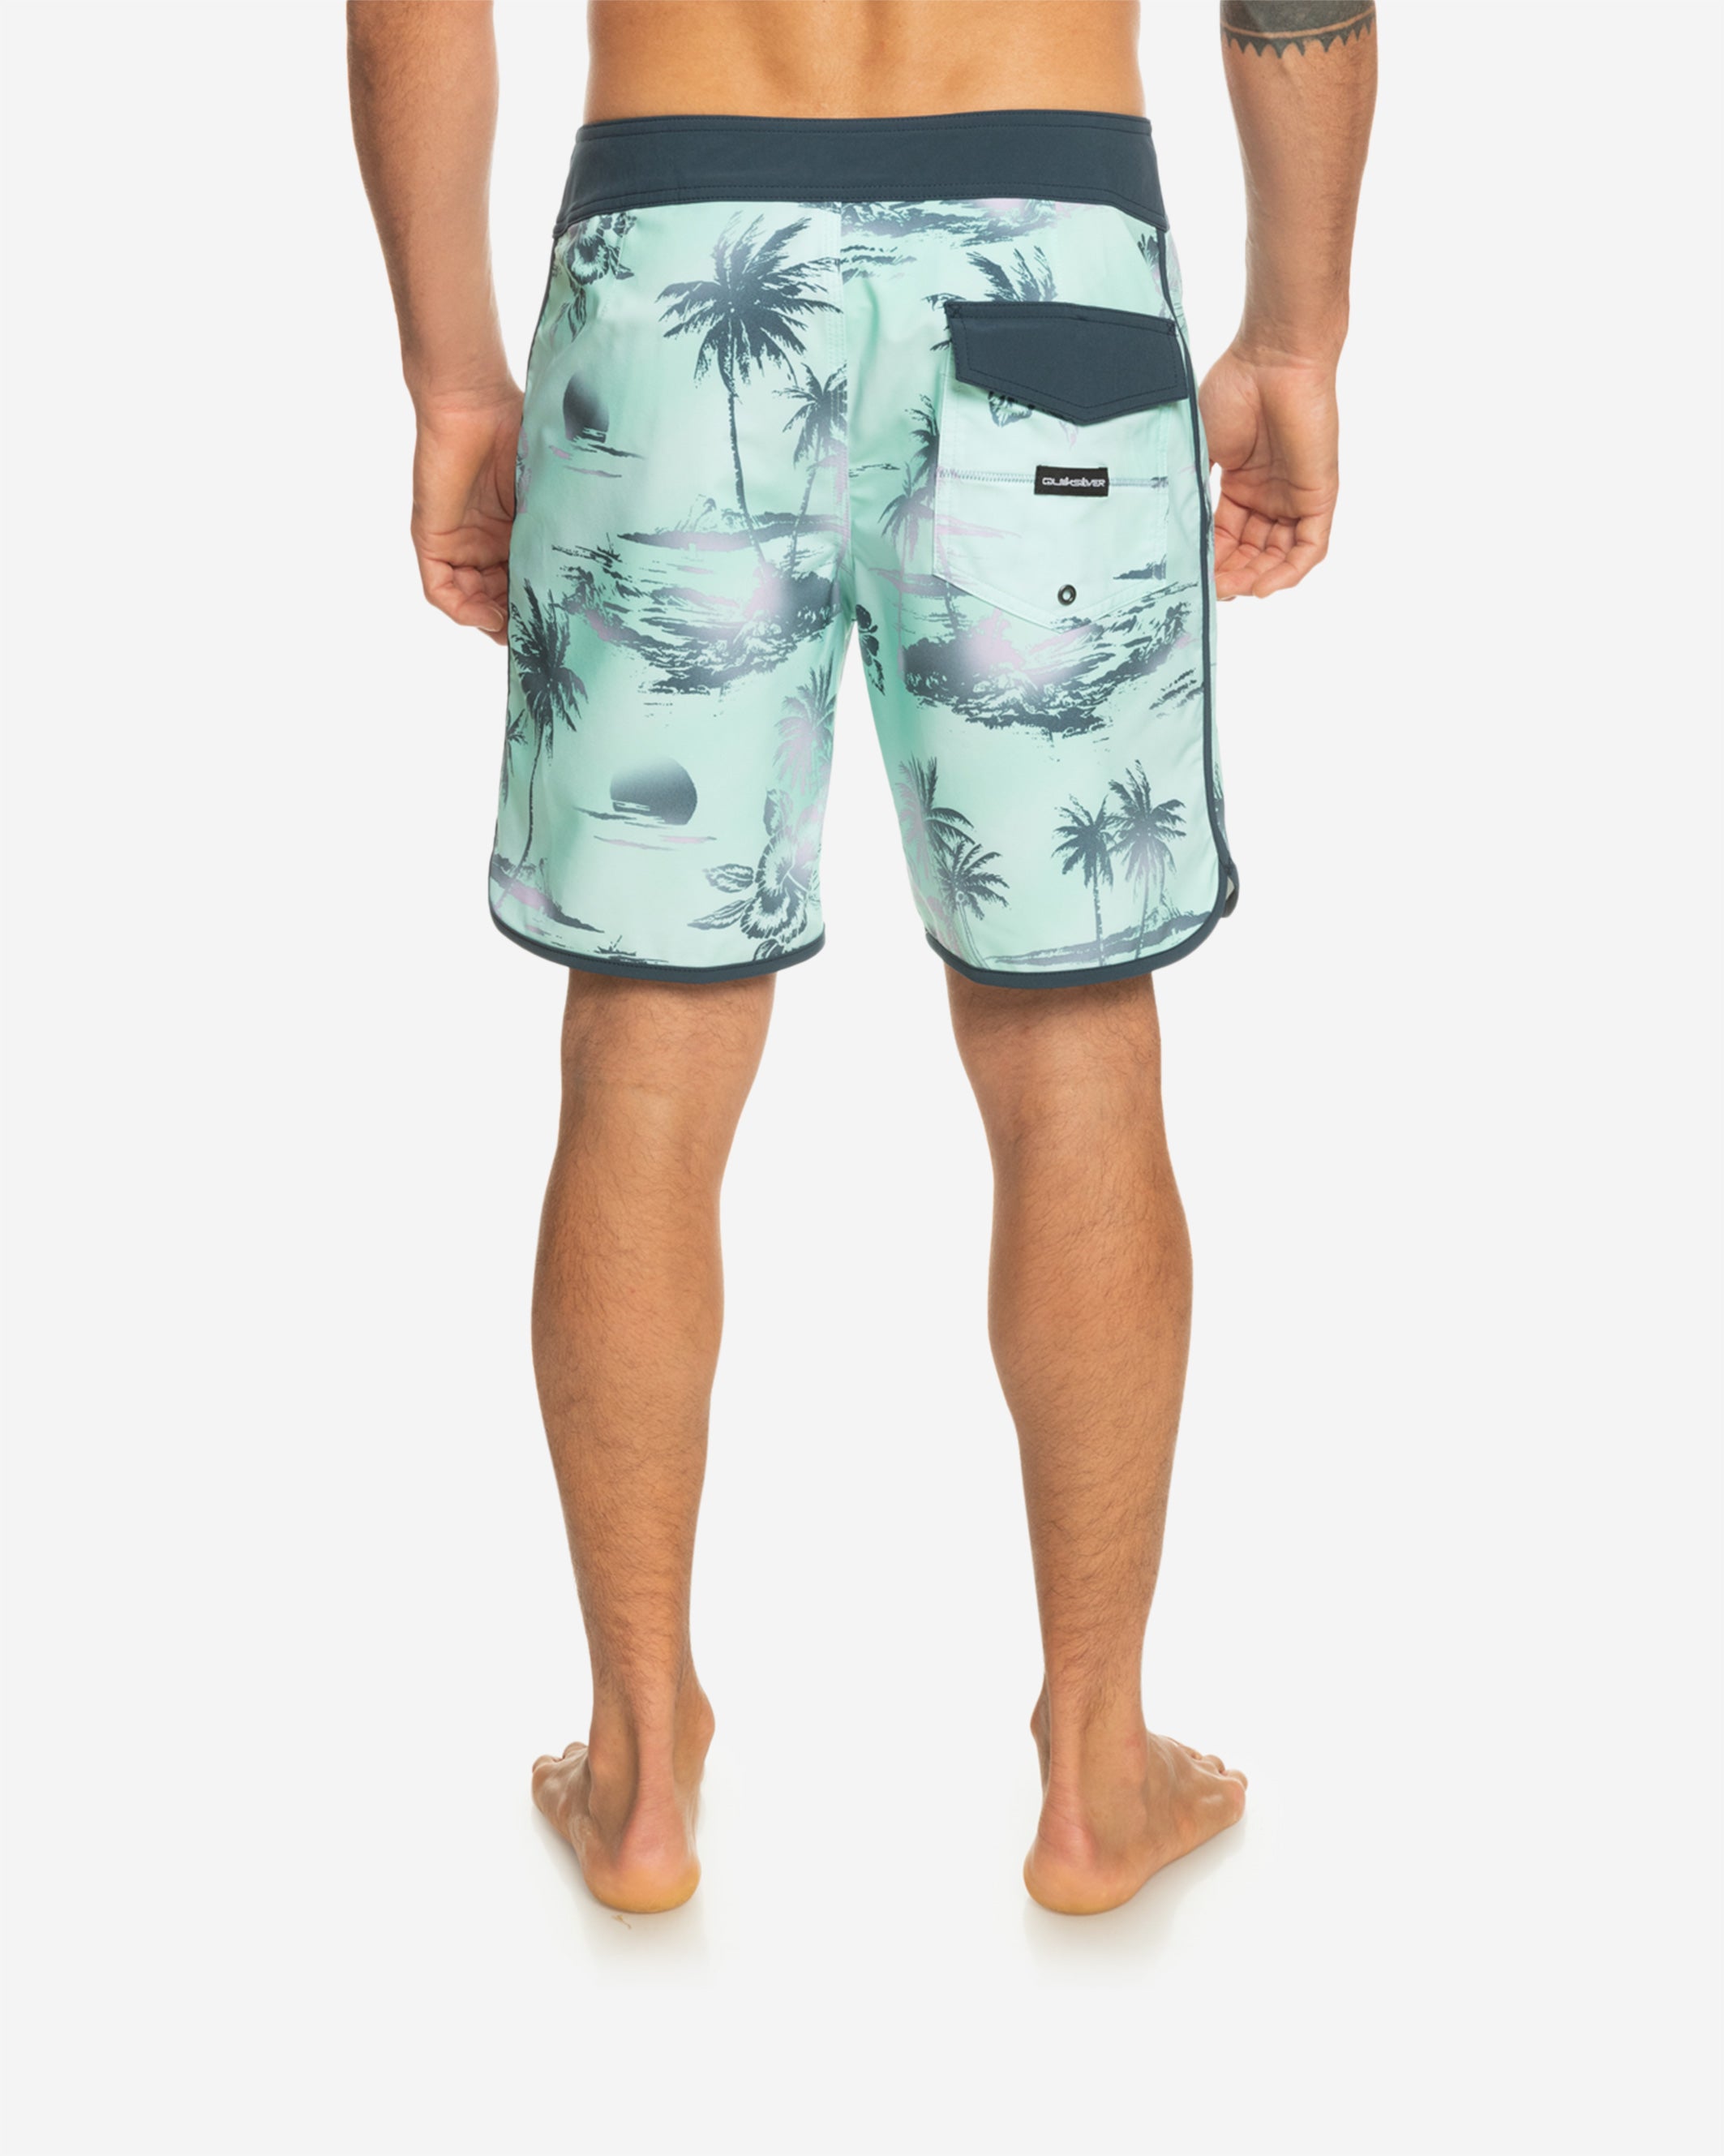 The scallop hem says vintage cool. But this modern print is a nod to the future. Together they create one of the coolest board shorts ever. The Surfsilk Scallop has plenty of performance features too, including a recycled fabric made from ocean waste with 4-way stretch.